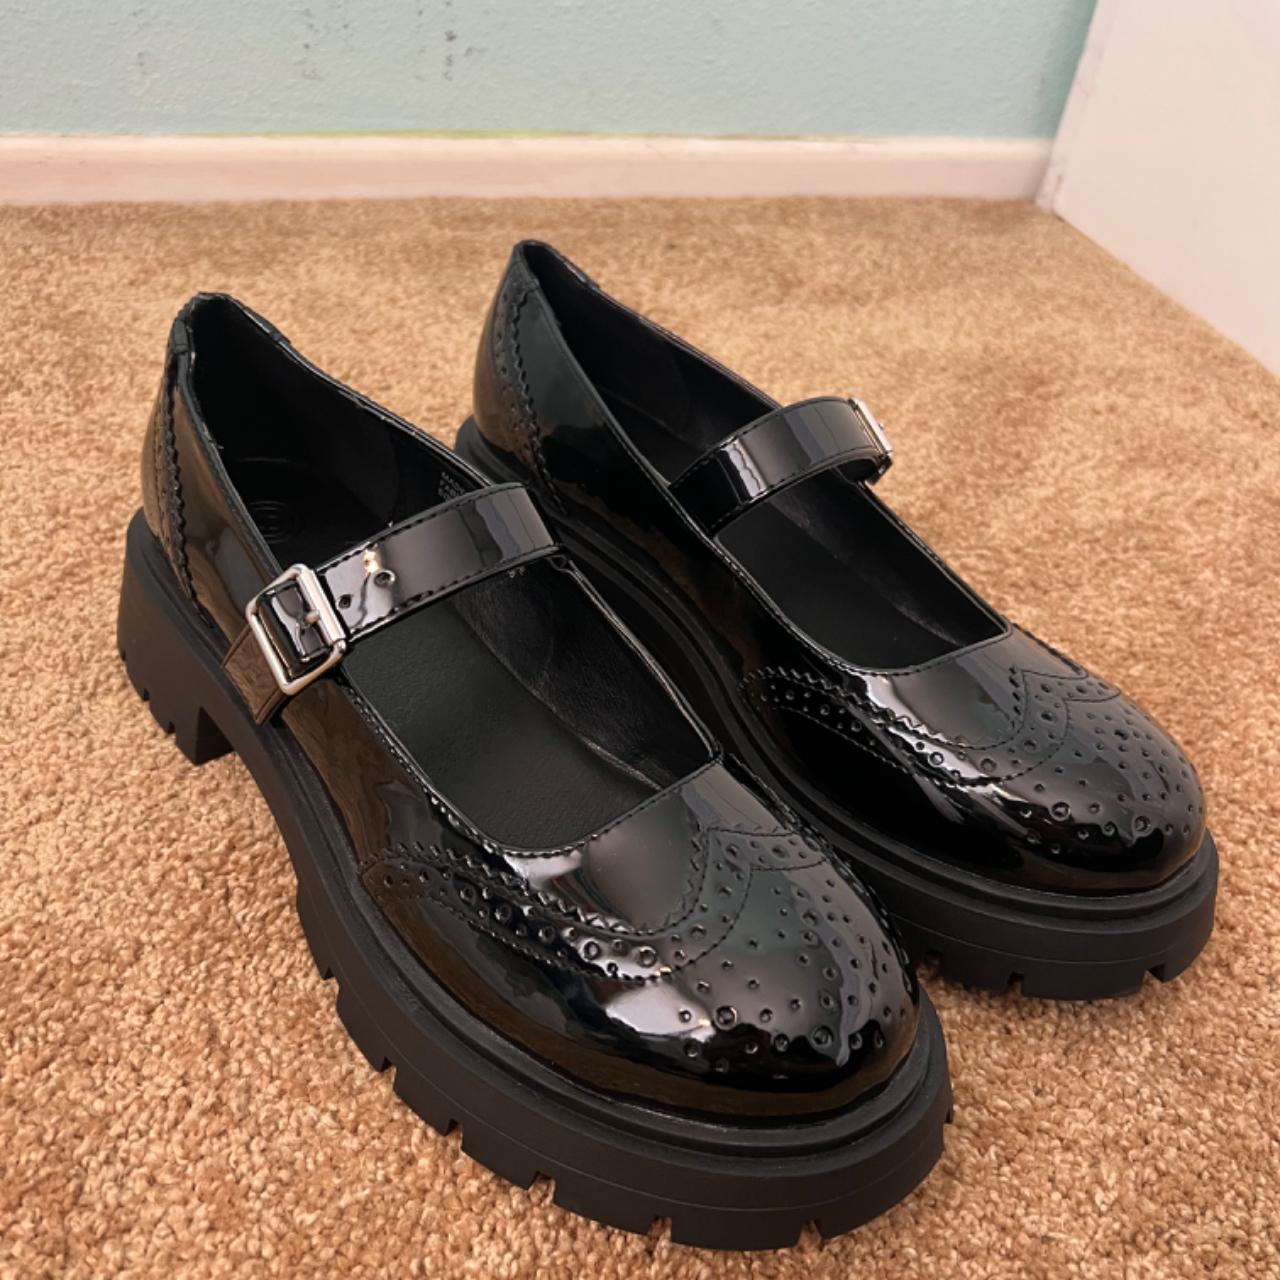 Urban Outfitters Women's Black Loafers